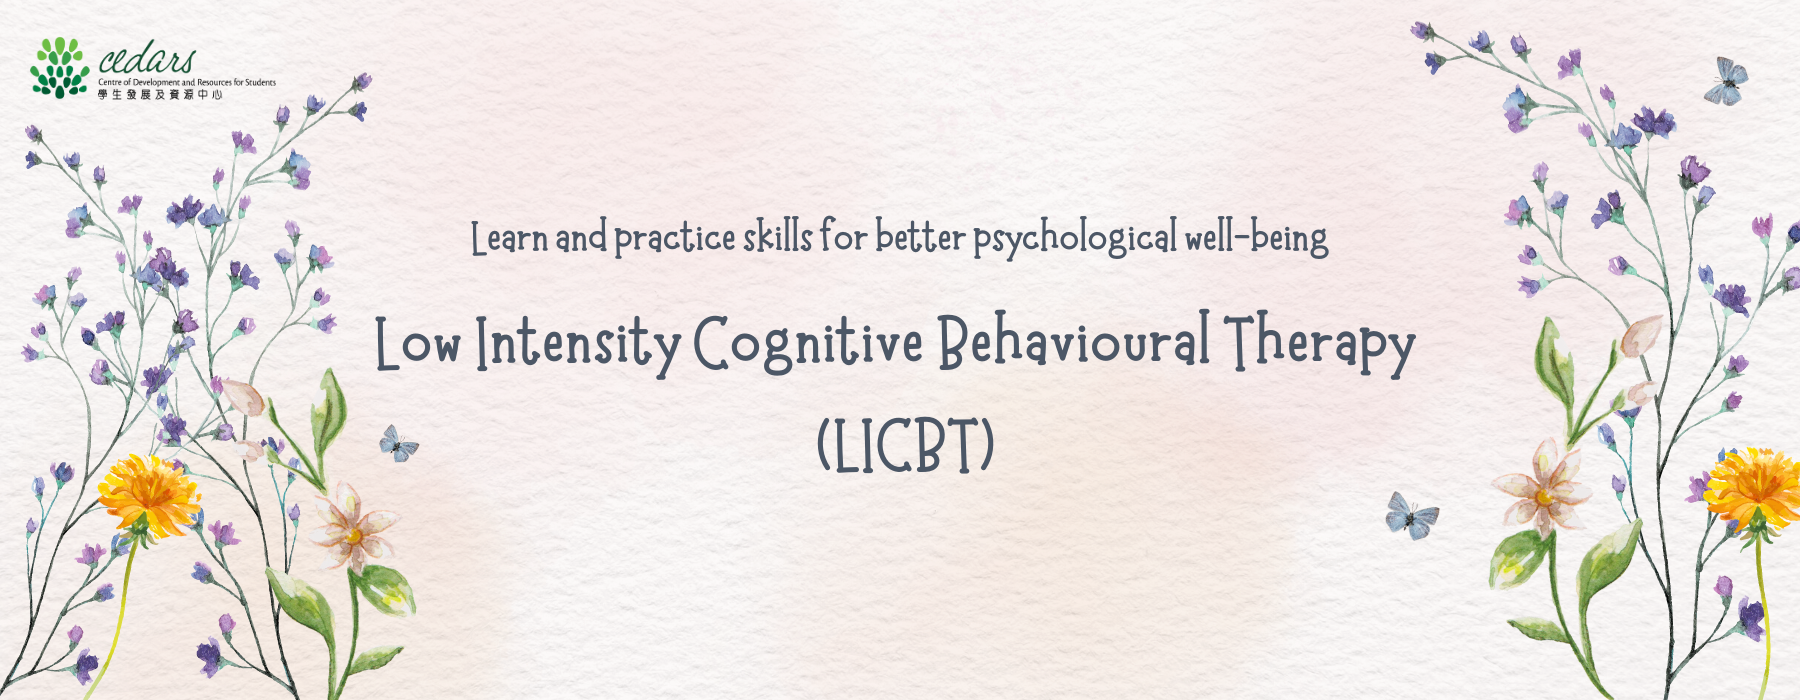 Low Intensity Cognitive Behavioural Therapy